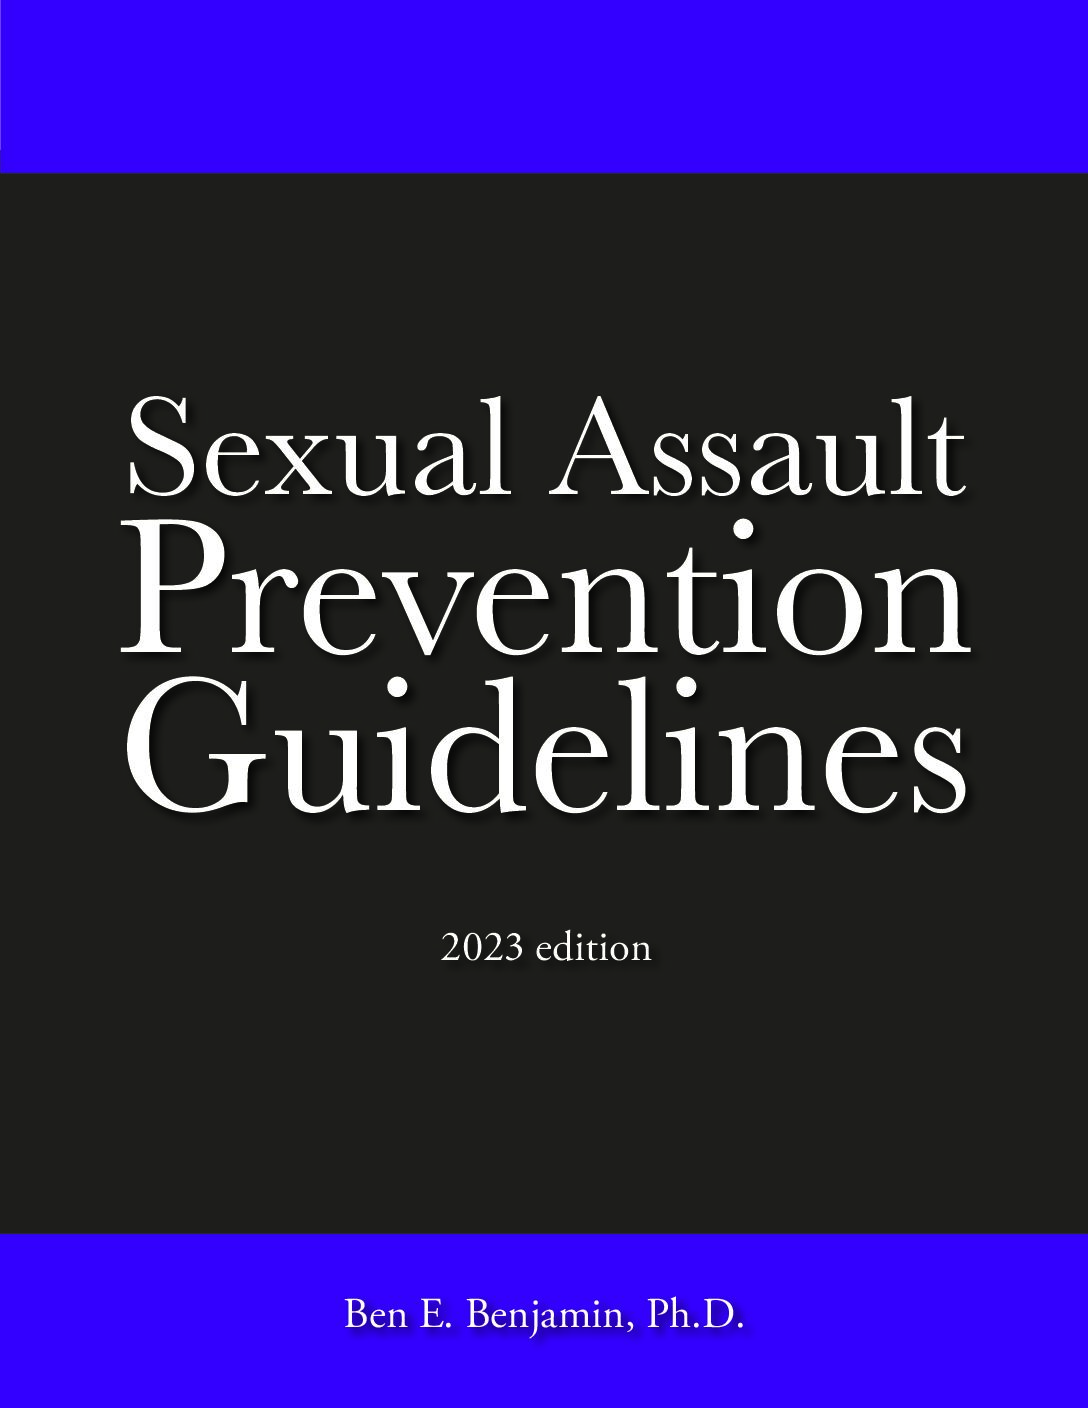 Guidelines for Sexual Assault Prevention